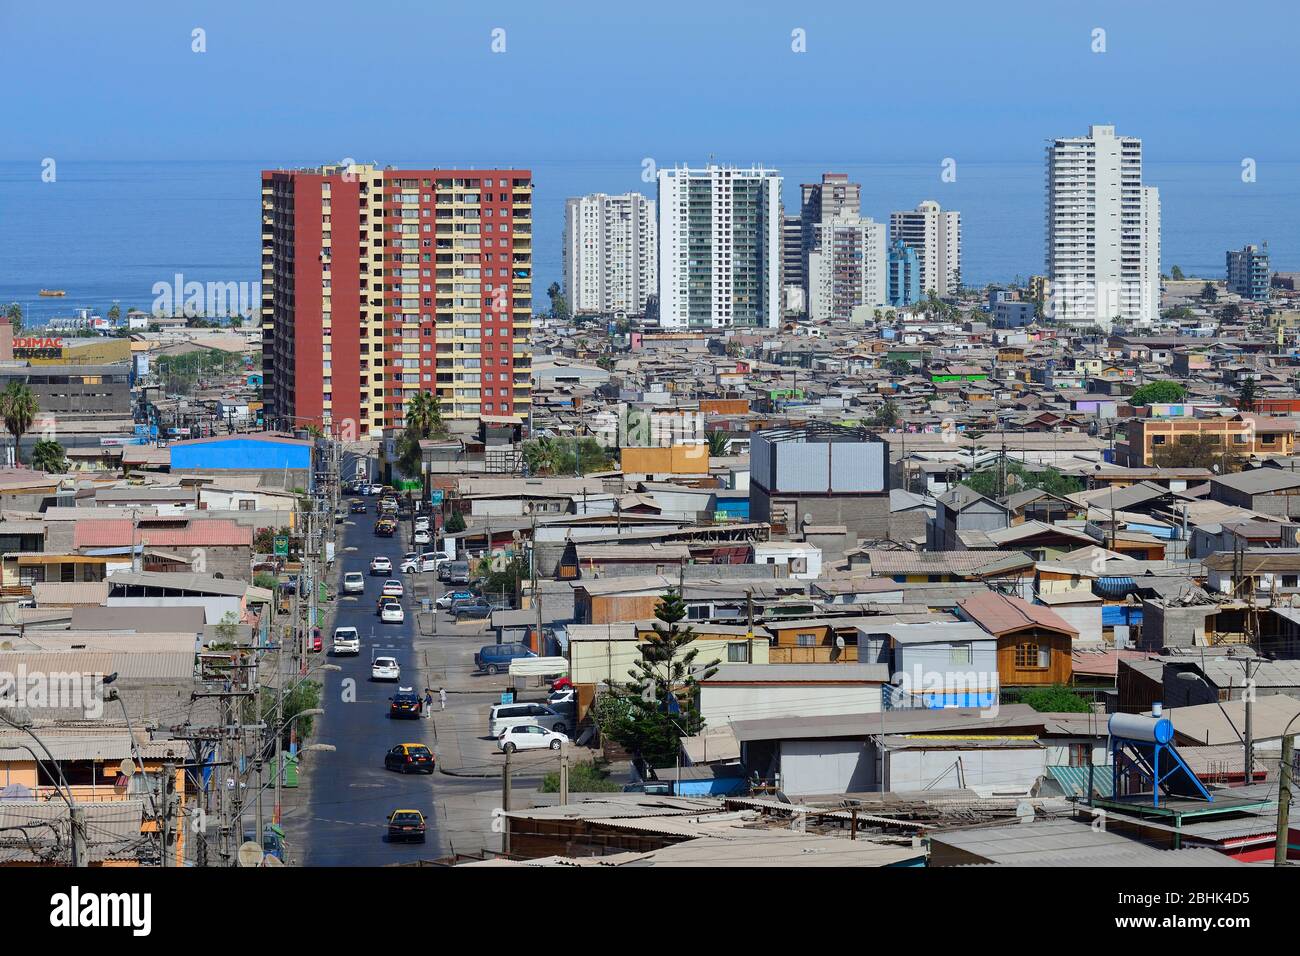 Typical simple residential buildings in front of skyscrapers, Iquique, Tarapaca region, Chile Stock Photo